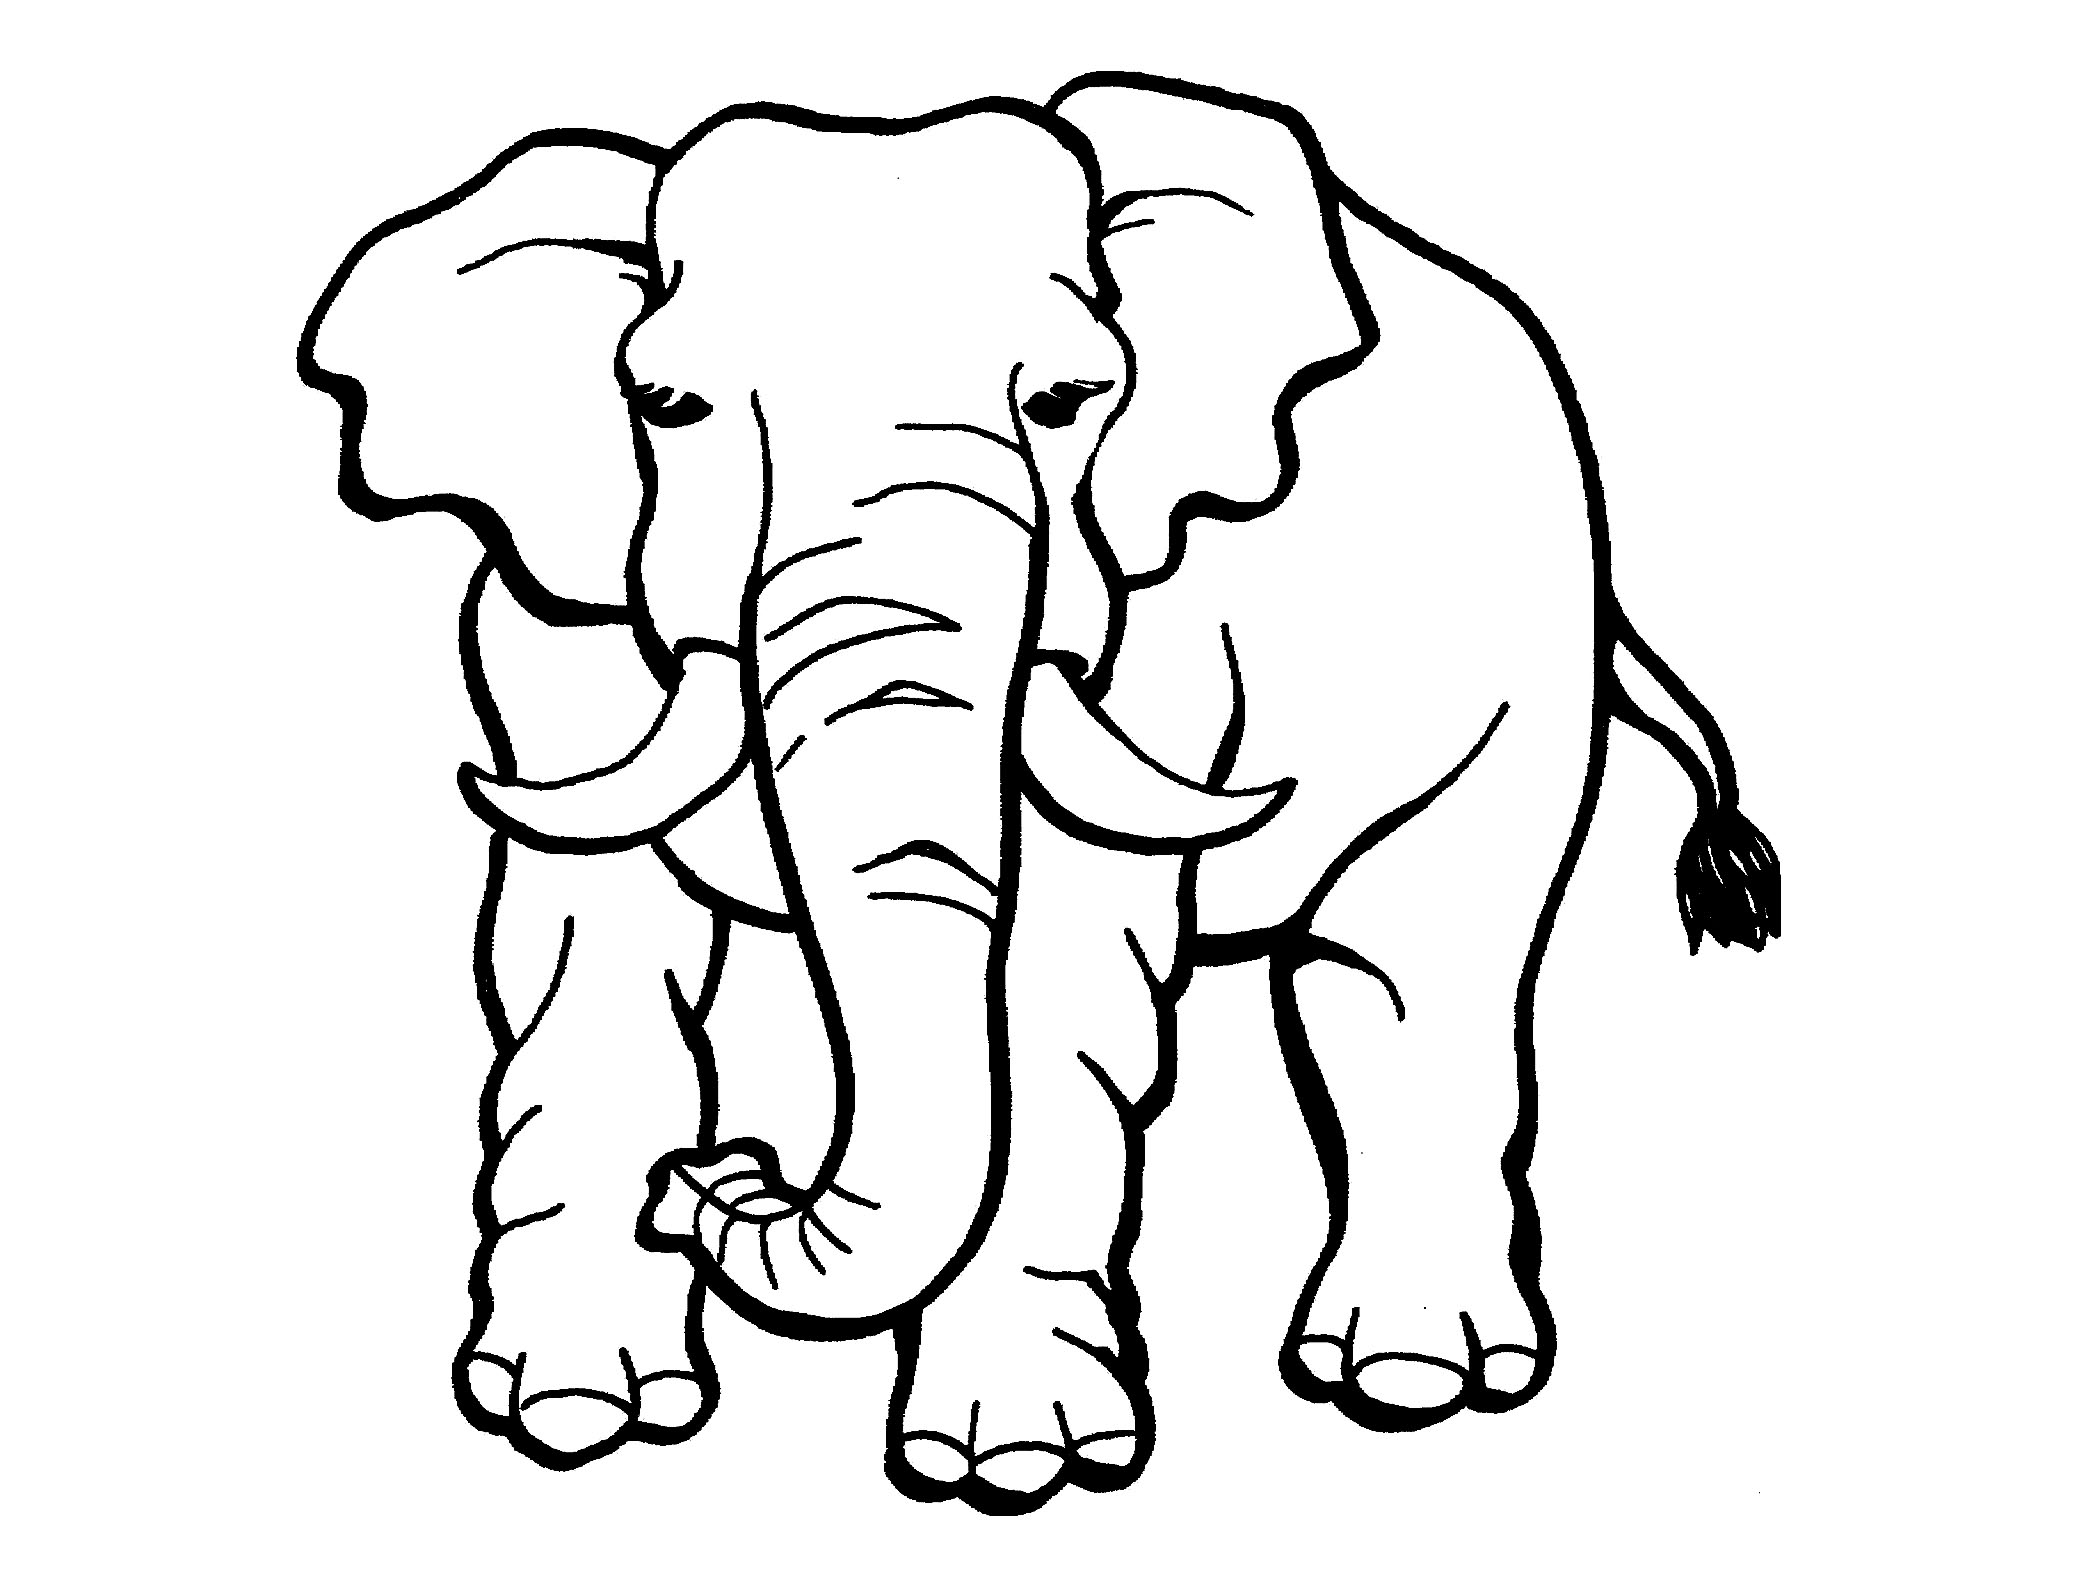 Download Elephants to print for free - Elephants Kids Coloring Pages